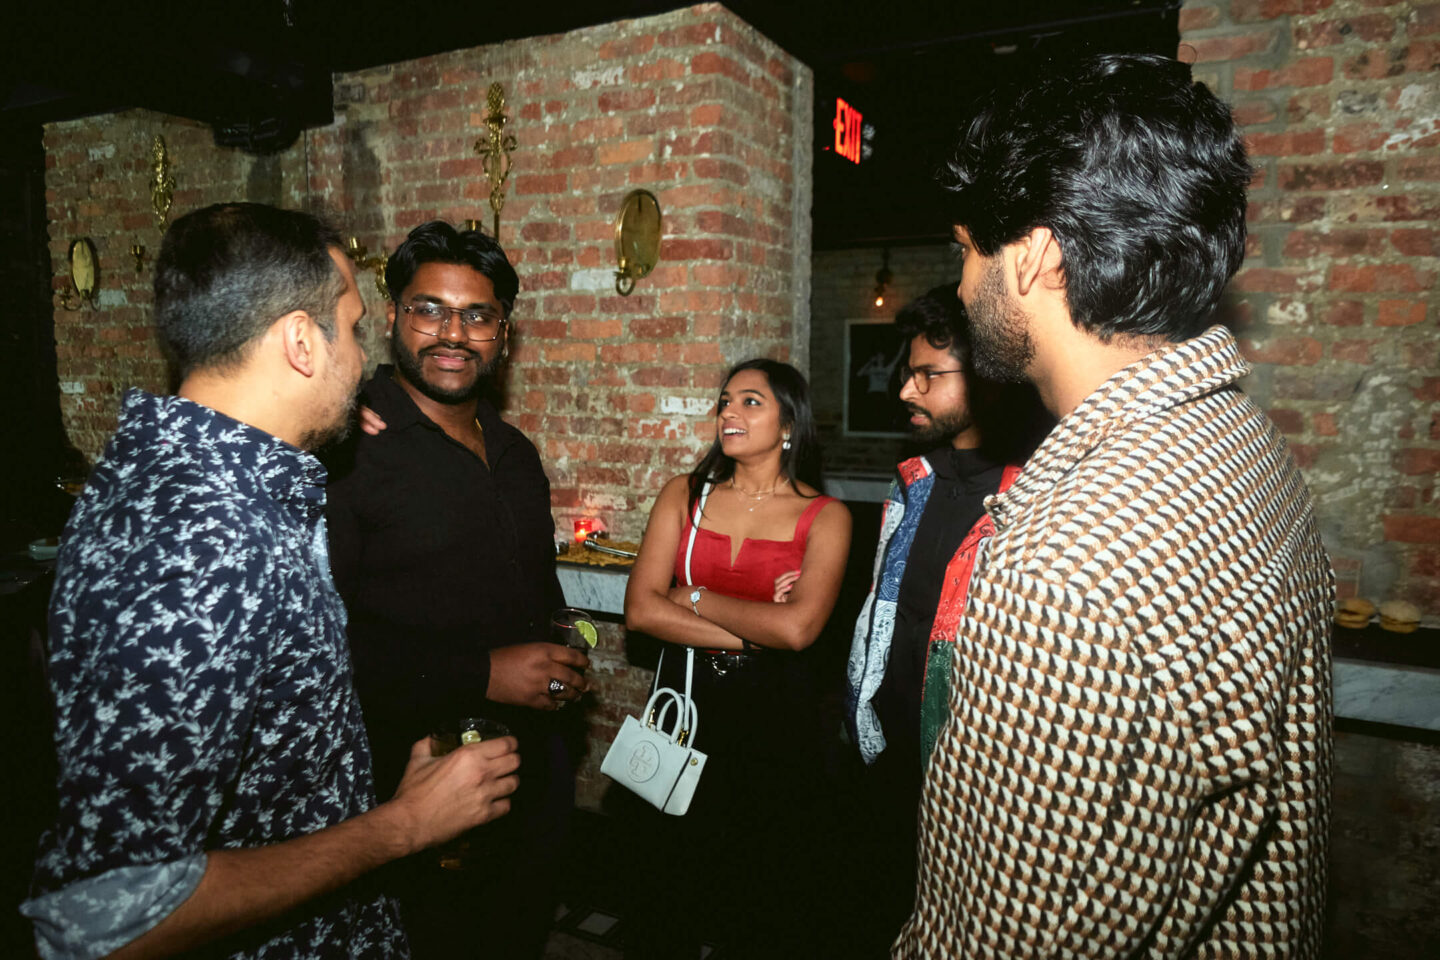 Arrambam - Unnaale - The Album Tour - Tamil Meetup Event - Saint Speakeasy NYC - After Party Meetup - Networking Event Photography - Lifestyle Photography